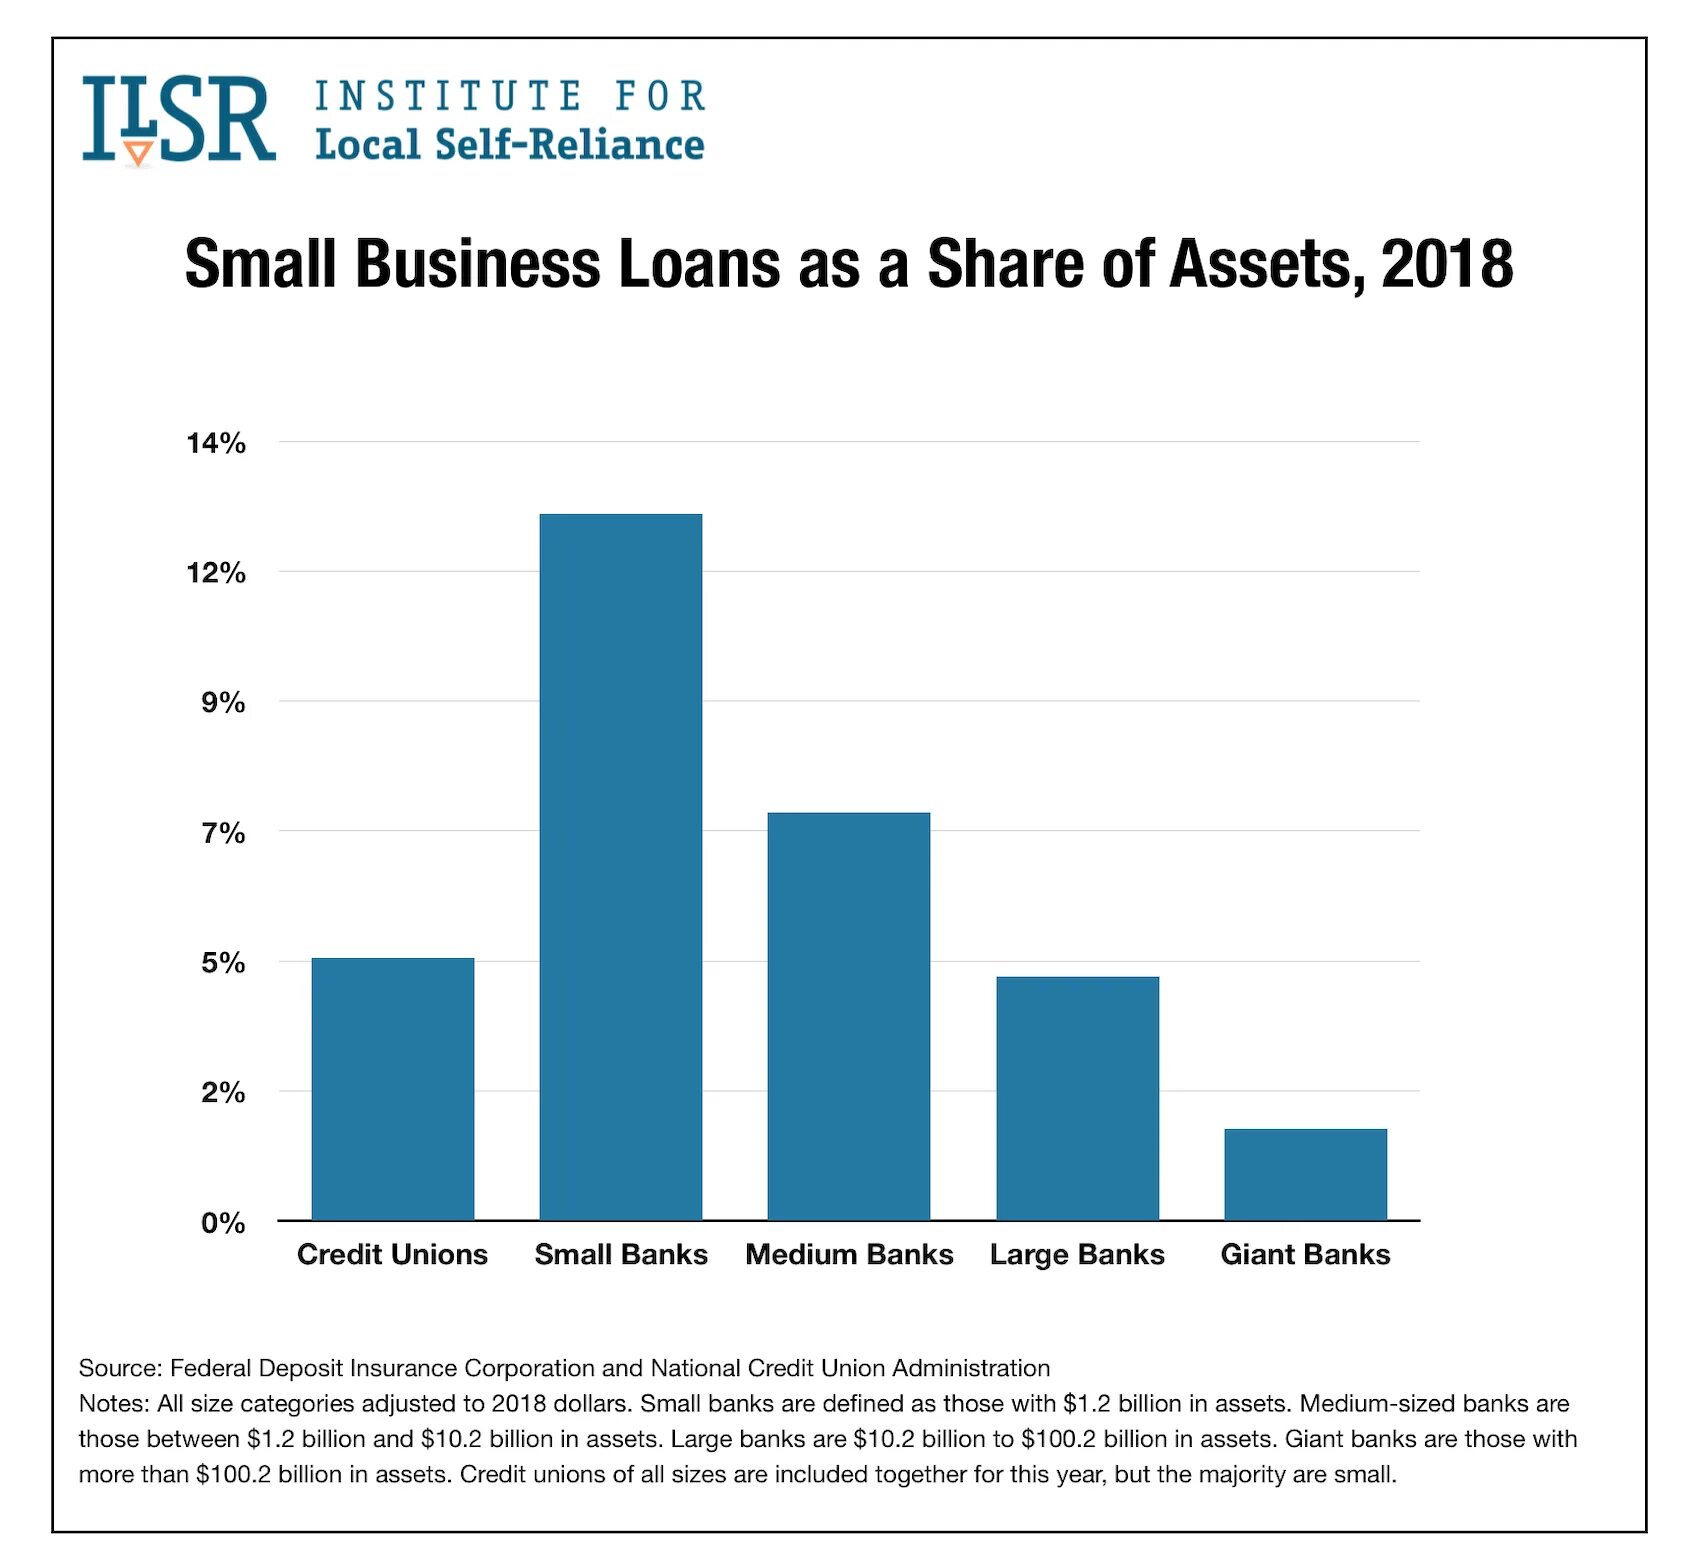 Asset shared. Small Businesses in USA. Union размер. Loans for shares. Small Business and private Enterprise.